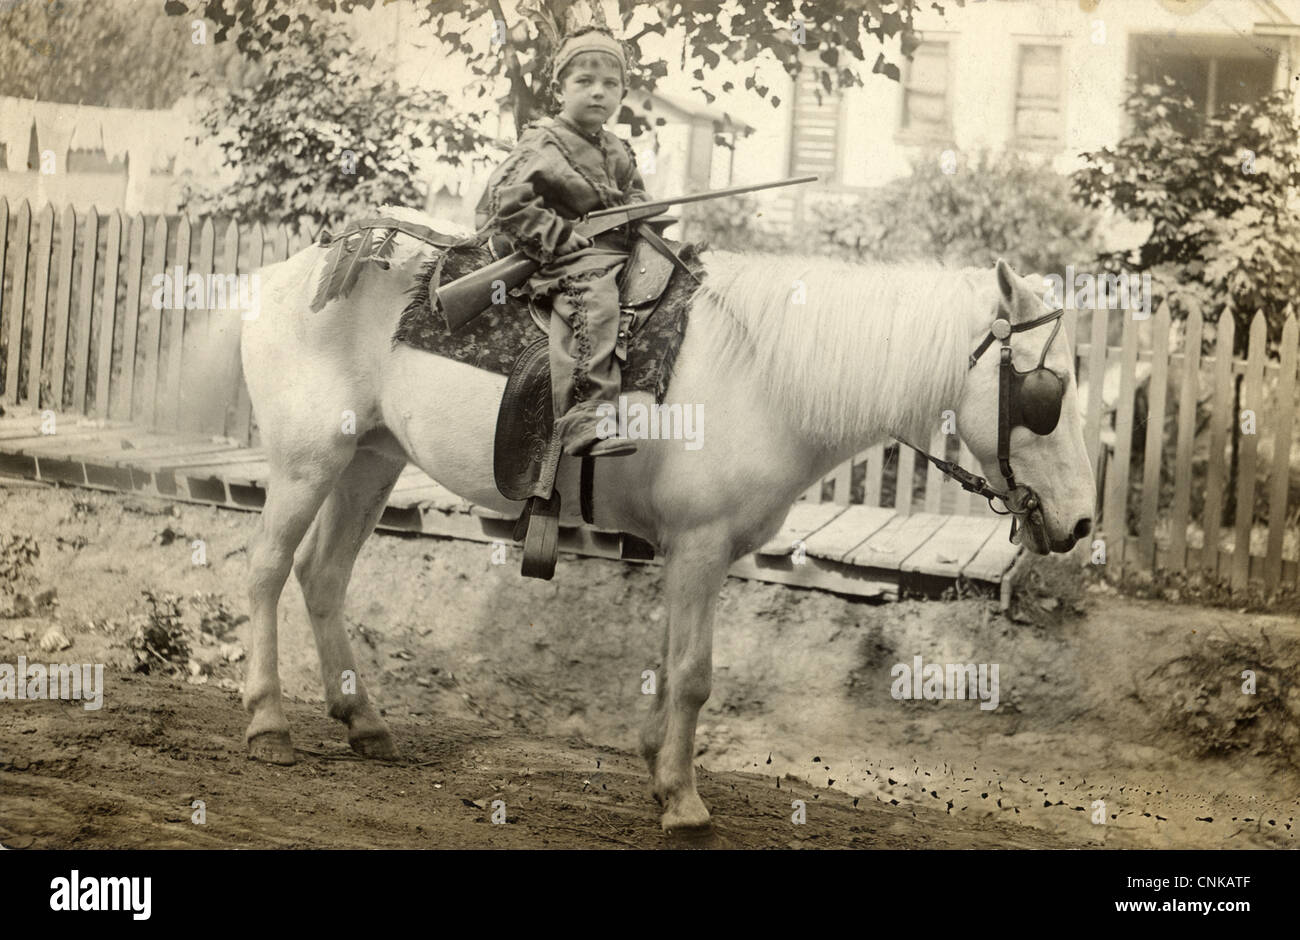 Armed Little Boy Indian Chief Riding a White Horse Stock Photo